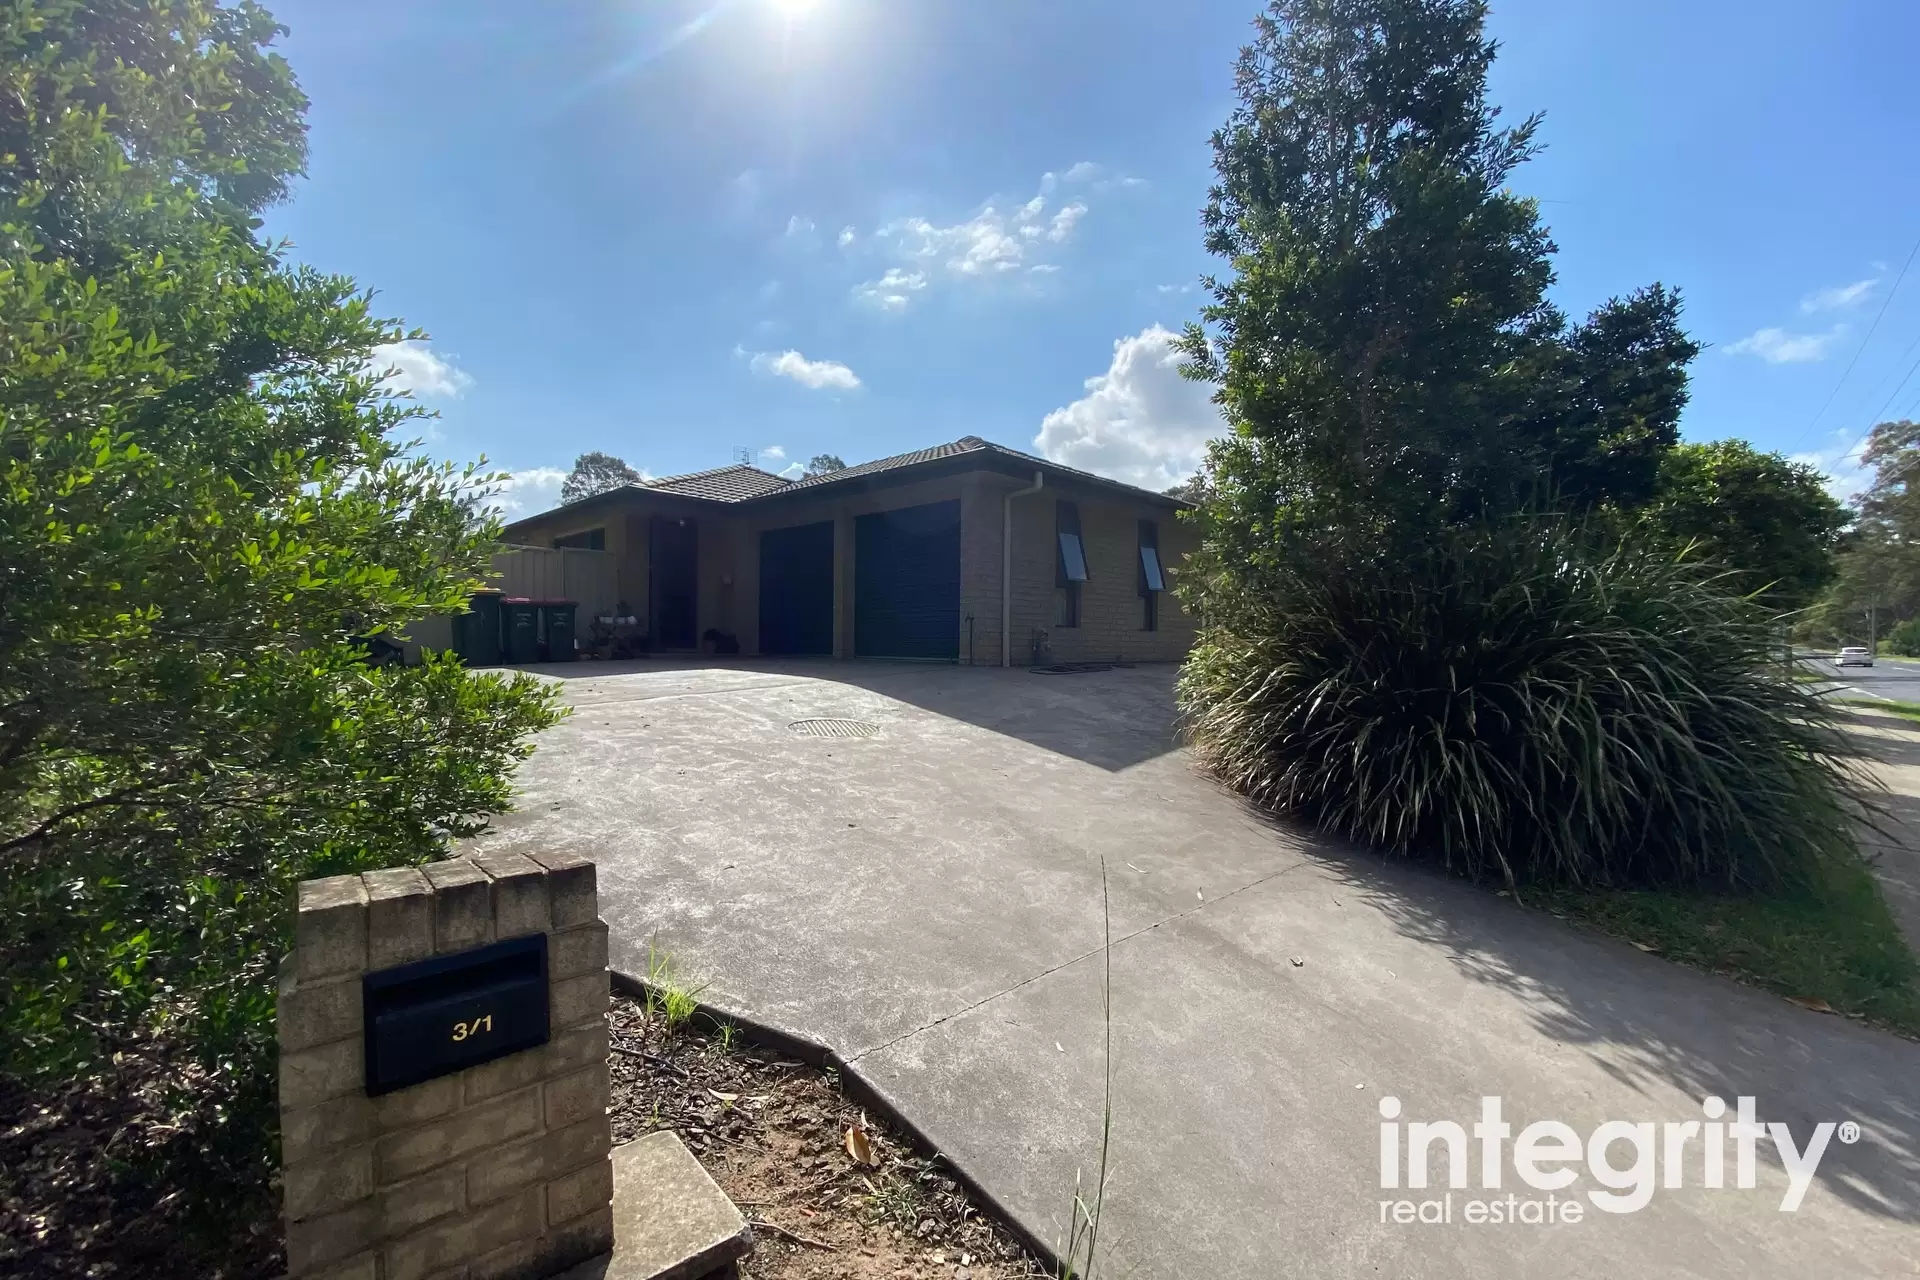 3/1 Holloway Road, South Nowra For Lease by Integrity Real Estate